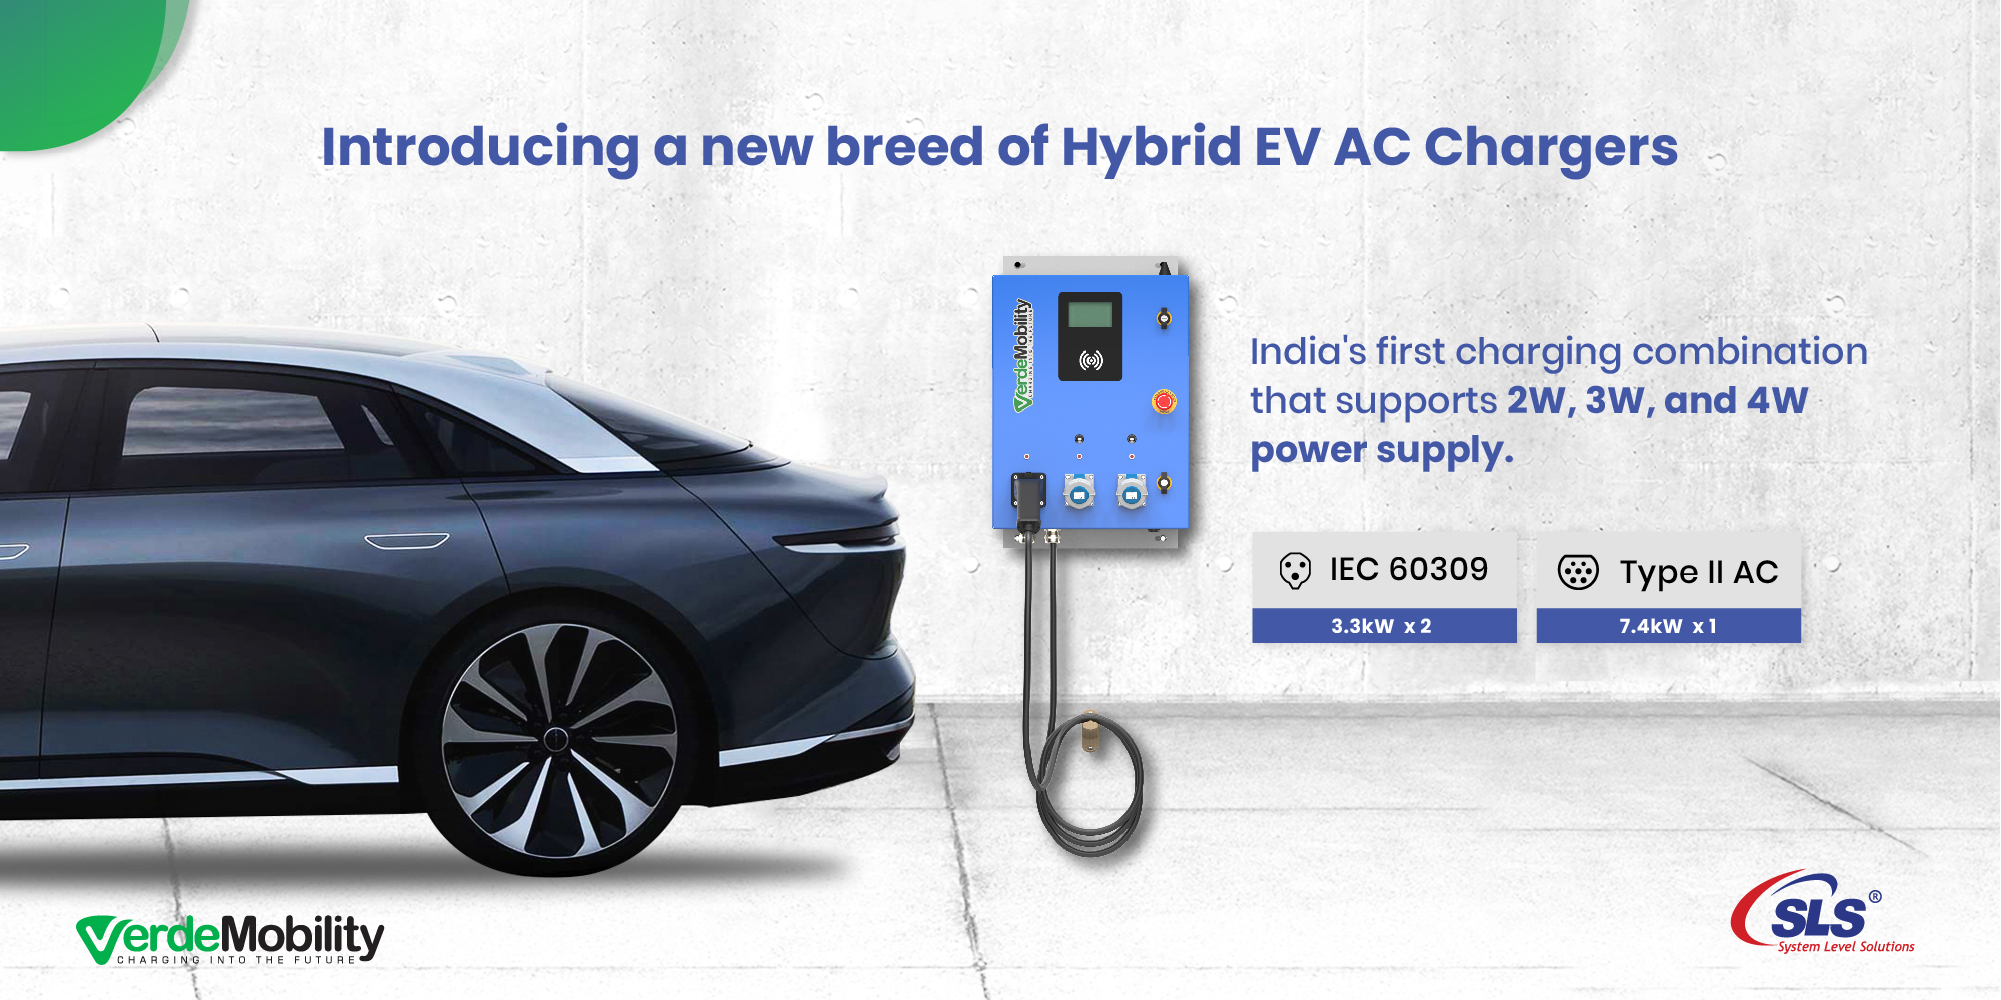 VerdeMobility Launches the First Ever Hybrid AC EV Chargers in India For Multi-Protocol Charging